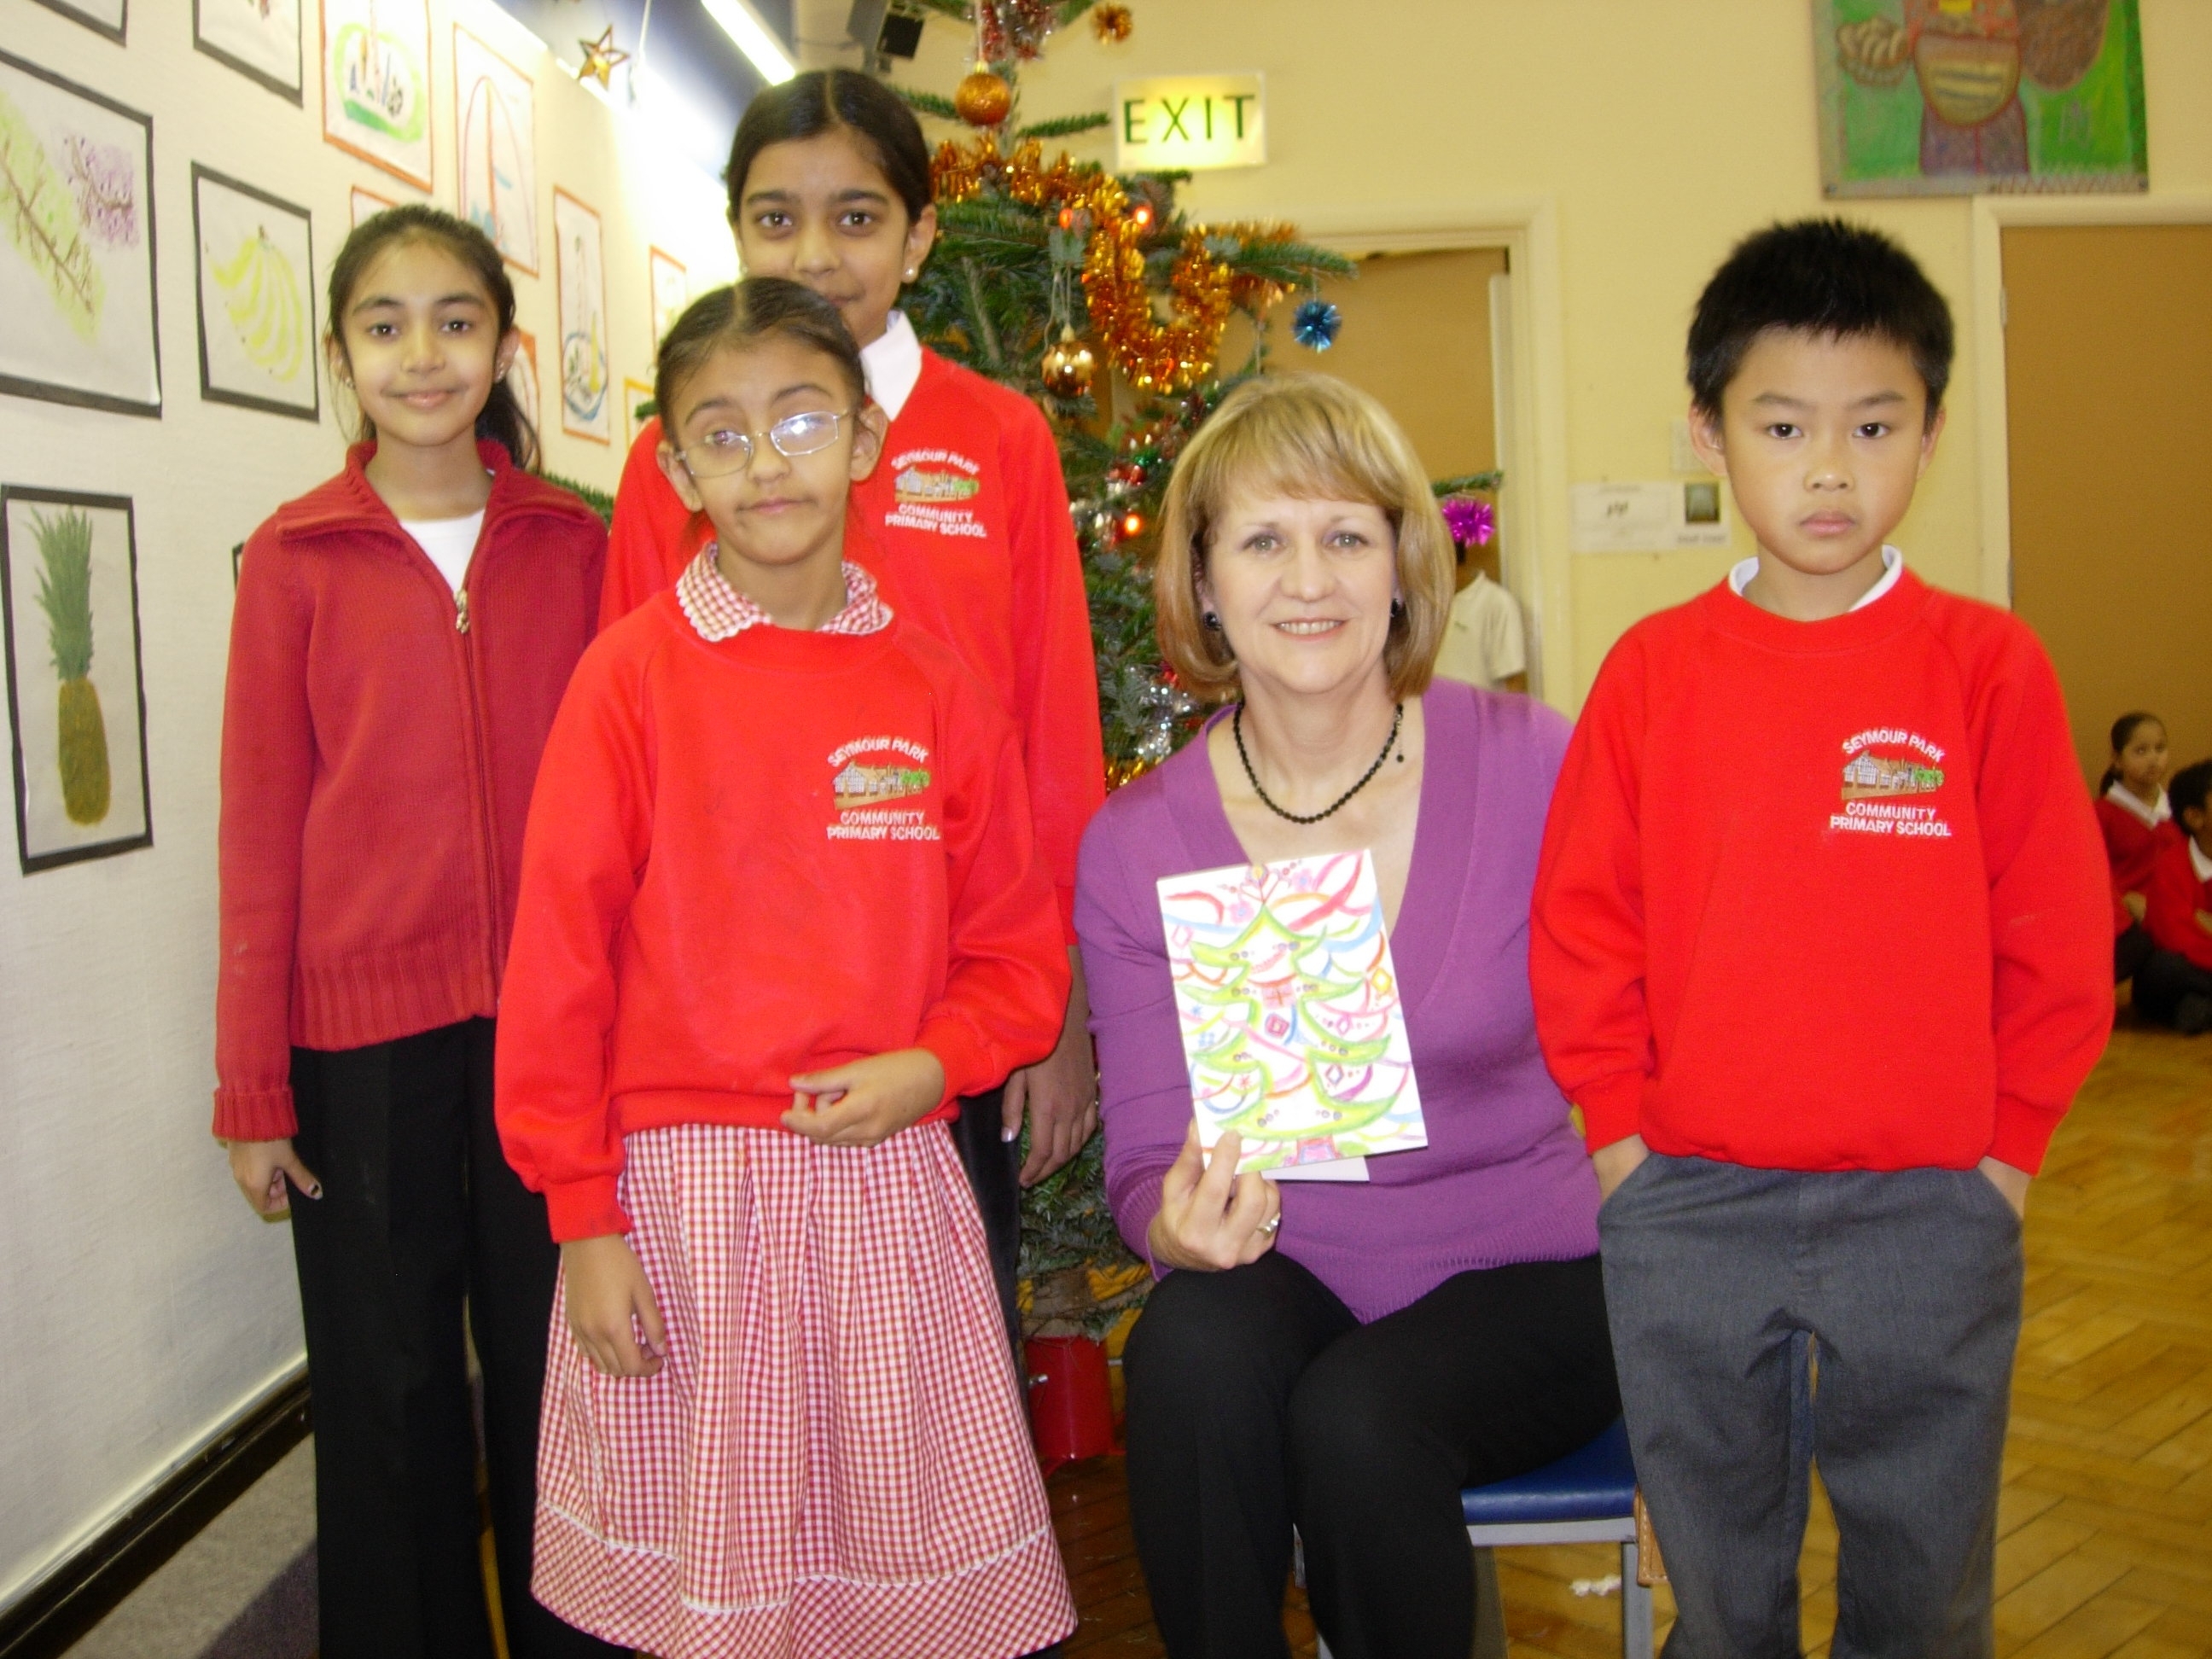 Bev presenting prizes to the winners of her 2006 Christmas Card Competition at Seymour Park Primary School